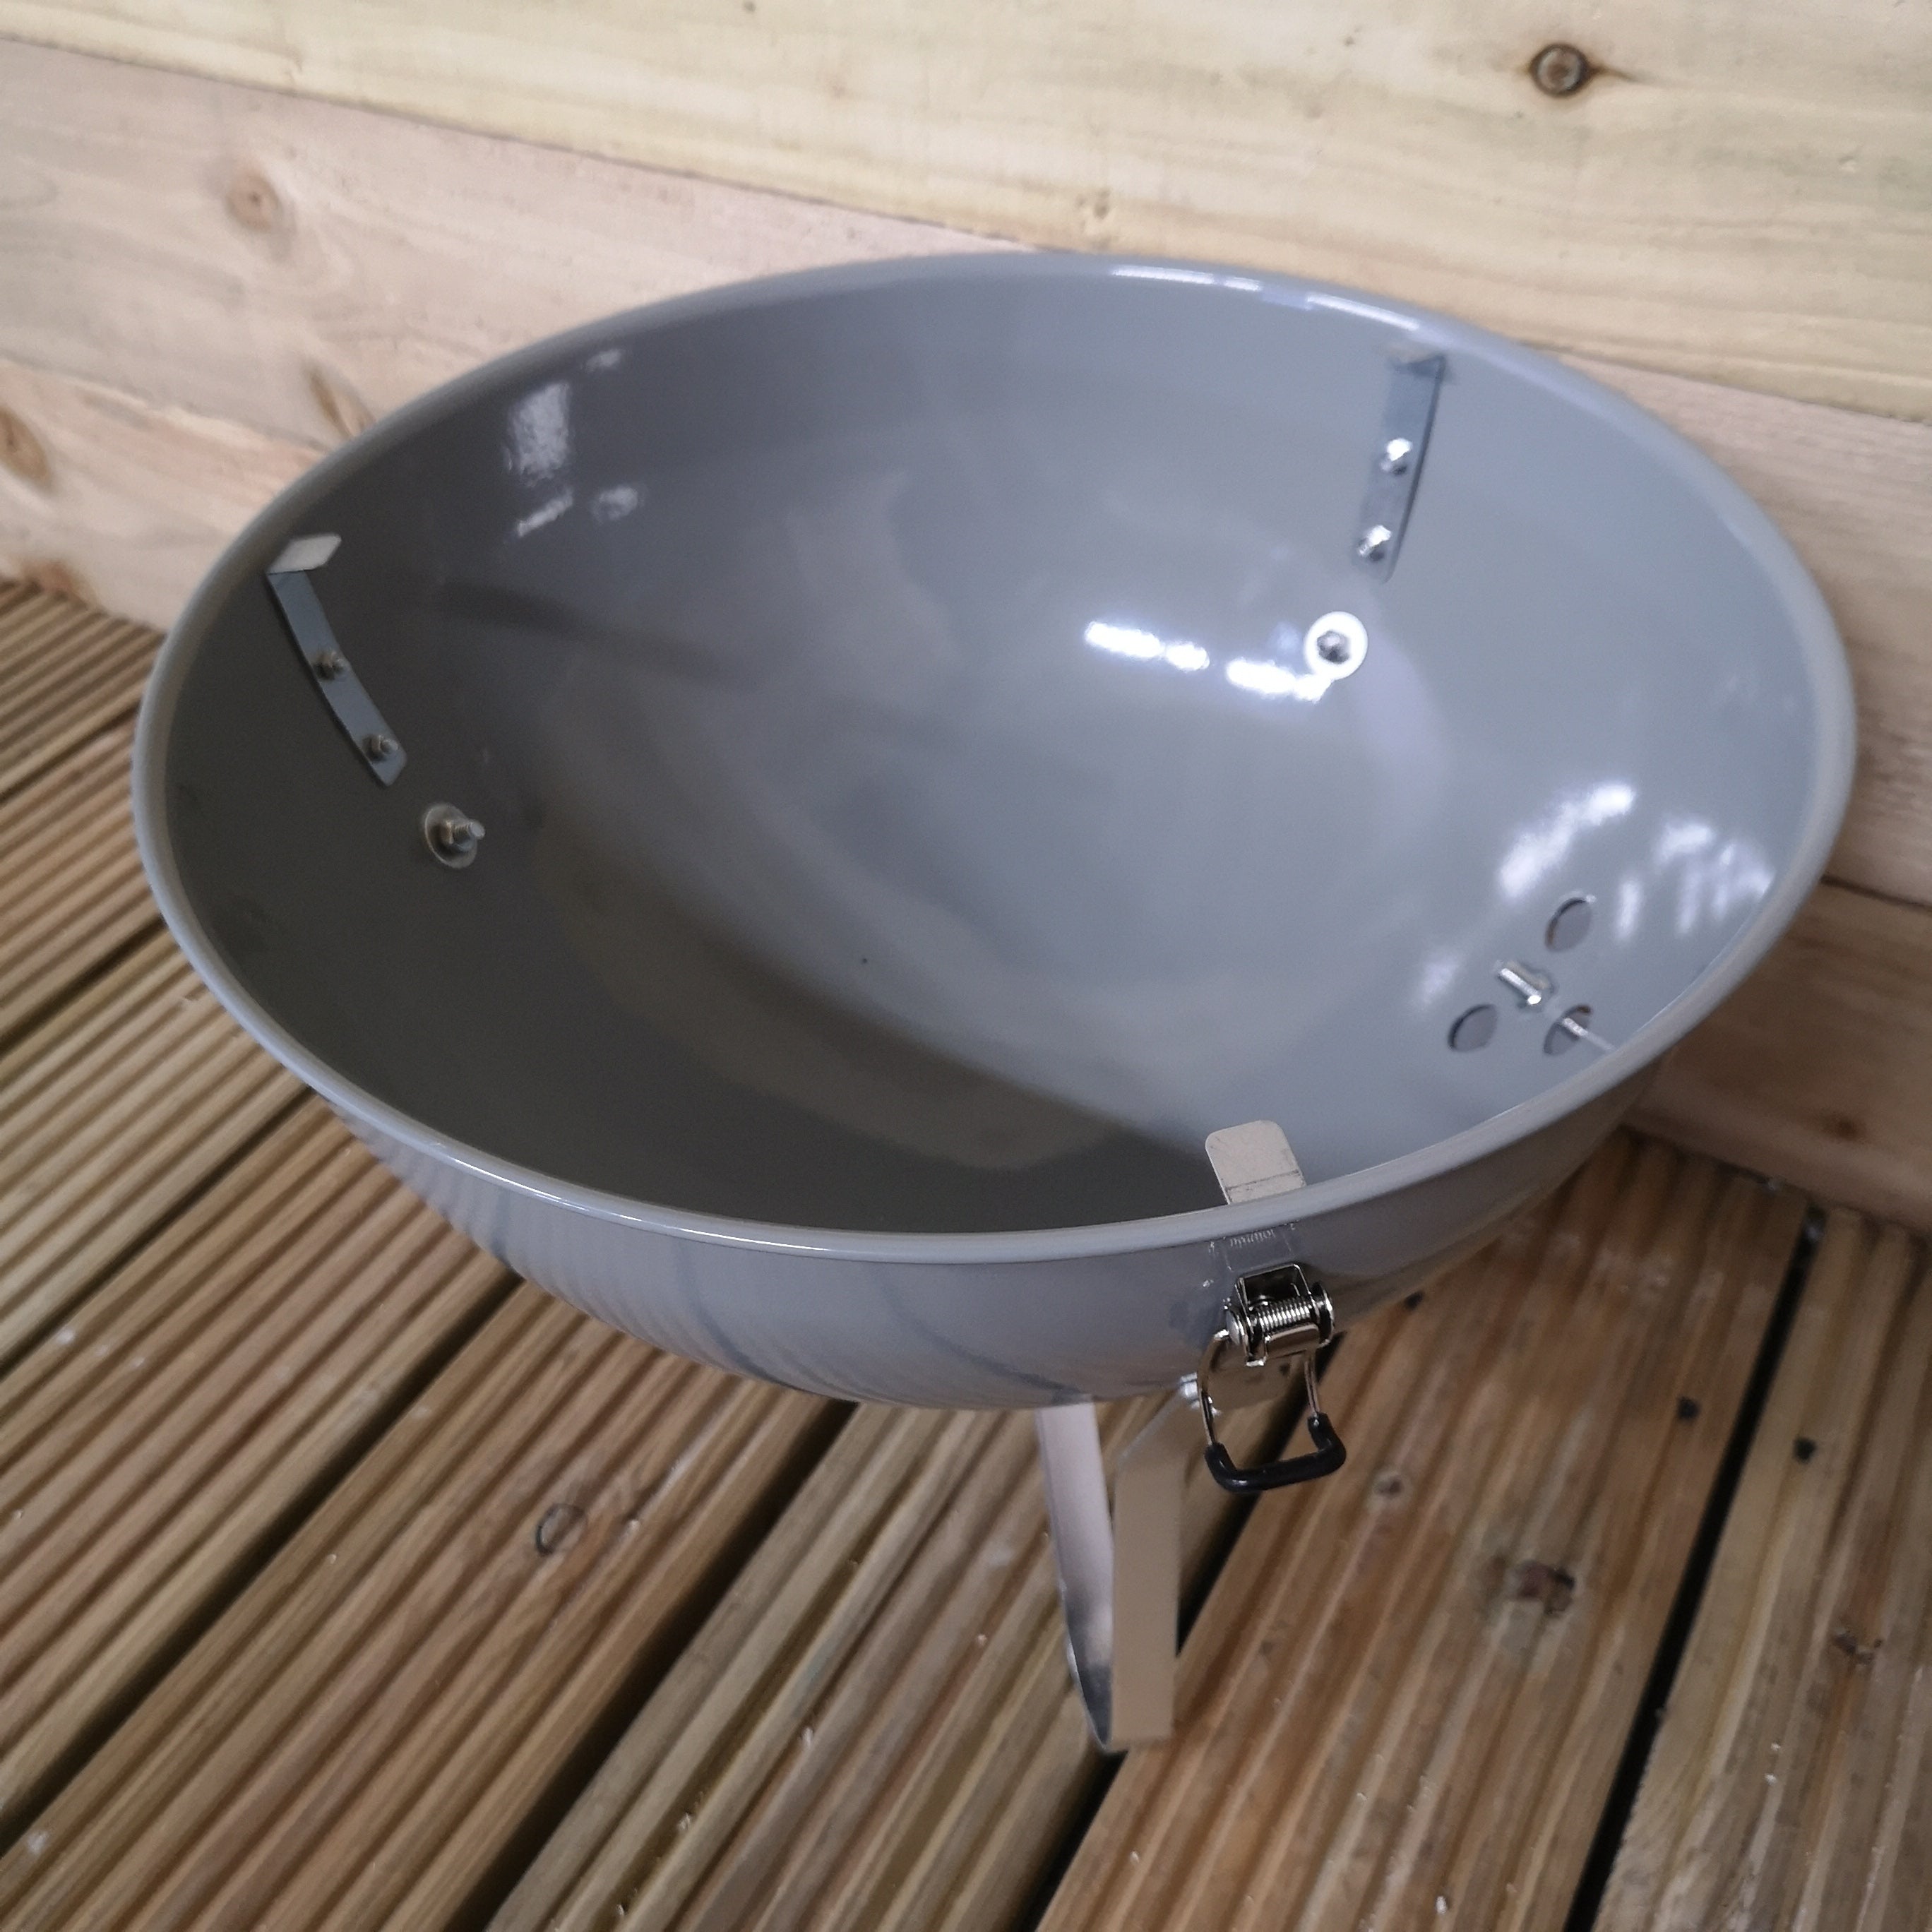 37cm Portable Grey Enamel Vented Kettle BBQ with Lid Ideal for Garden or Camping